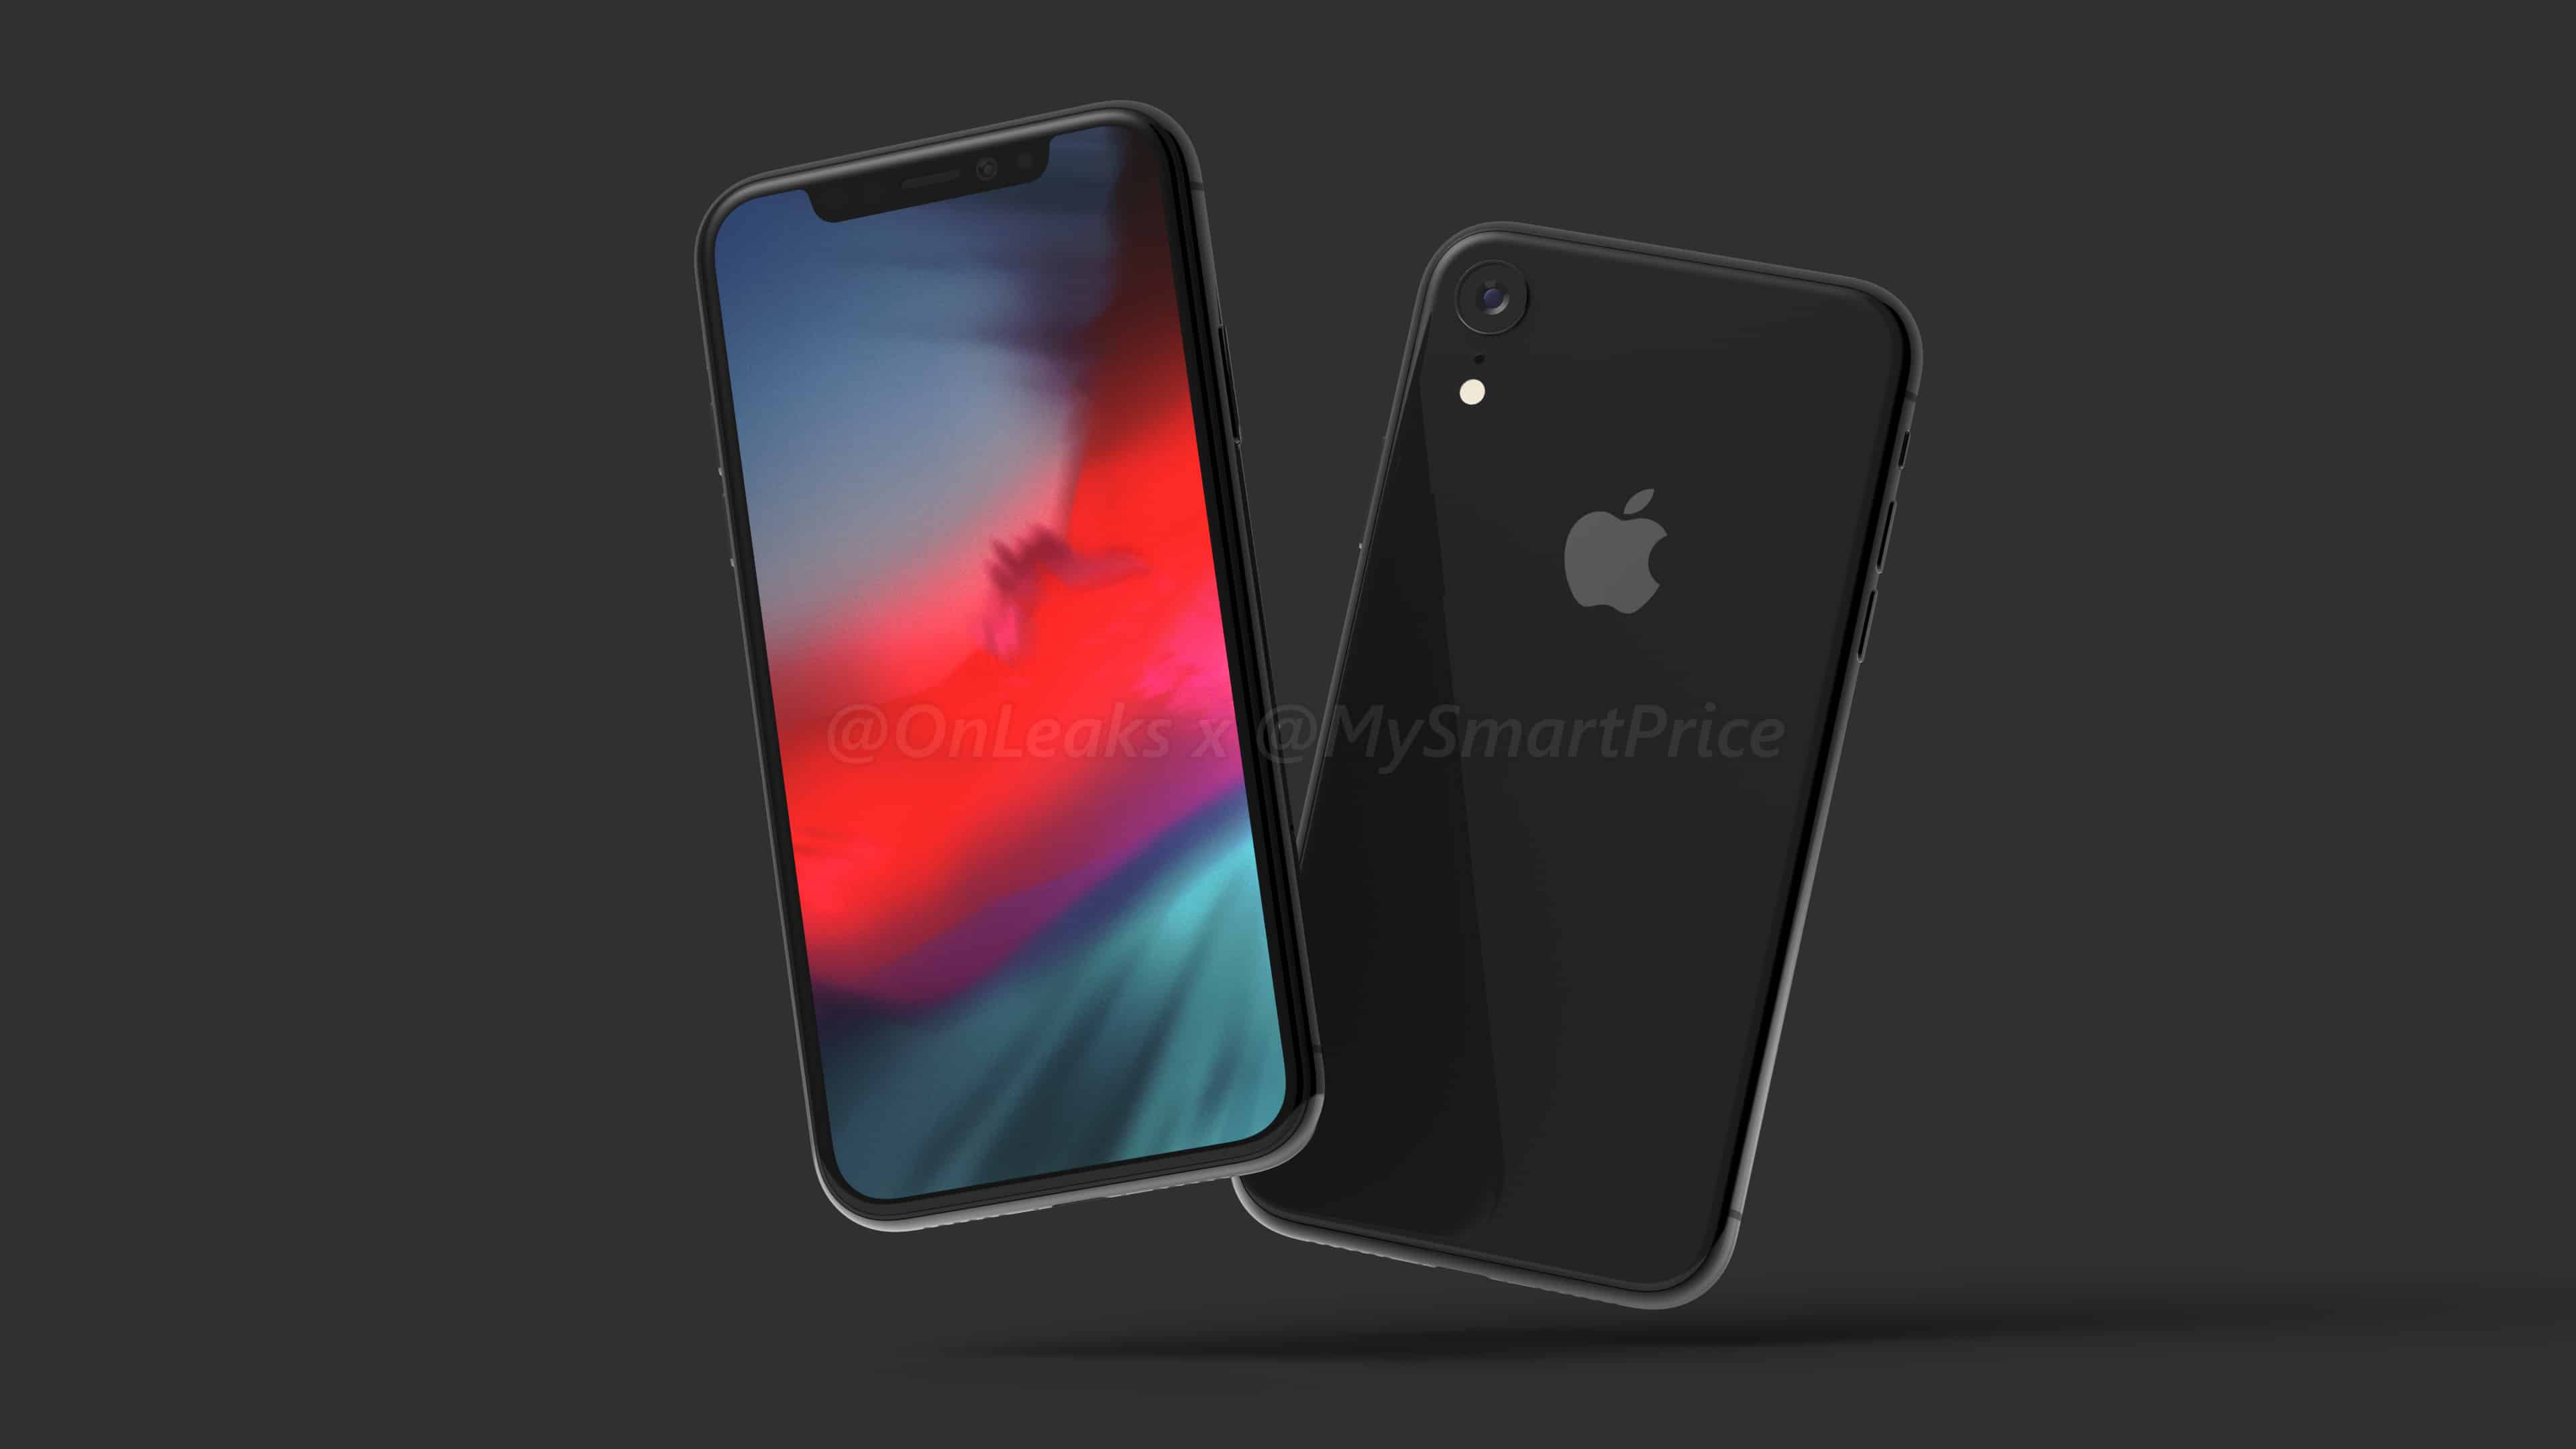 6.1-inch 2018 iPhone concept image